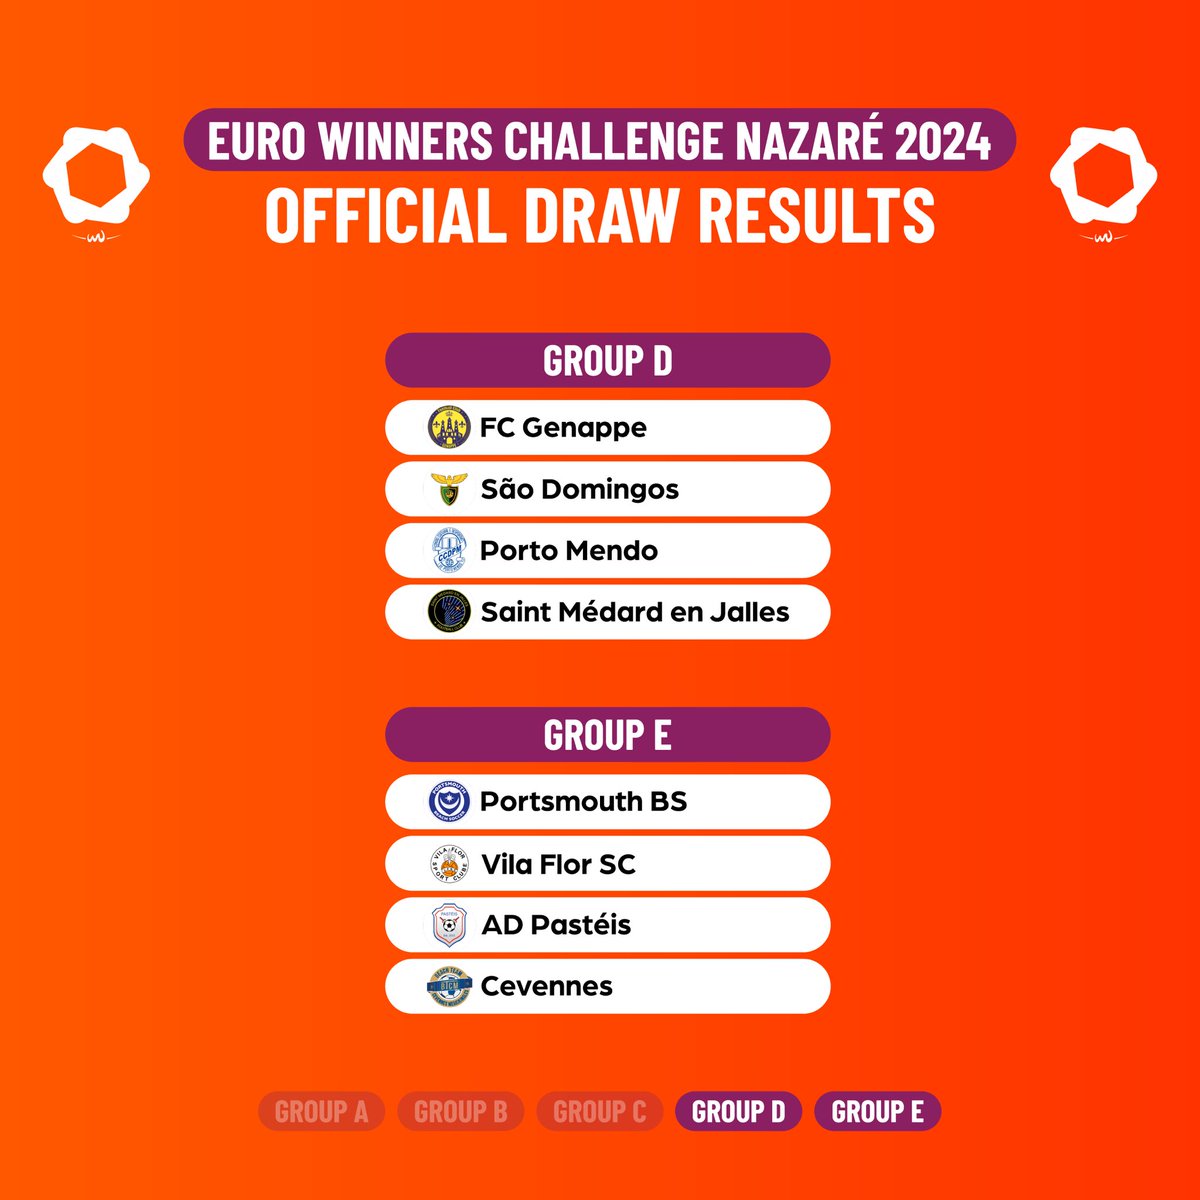 📣 Here are the 𝗢𝗙𝗙𝗜𝗖𝗜𝗔𝗟 𝗚𝗥𝗢𝗨𝗣𝗦 for the Euro Winners Challenge Nazaré 2024 🏆 𝗖𝗔𝗧𝗖𝗛 𝗔𝗟𝗟 𝗧𝗛𝗘 𝗔𝗖𝗧𝗜𝗢𝗡 from the Euro Winners Challenge 𝗟𝗜𝗩𝗘 𝗙𝗢𝗥 𝗙𝗥𝗘𝗘 on beachsoccertv.com 📺👀 #BeachSoccer #EWC2024 #Nazaré